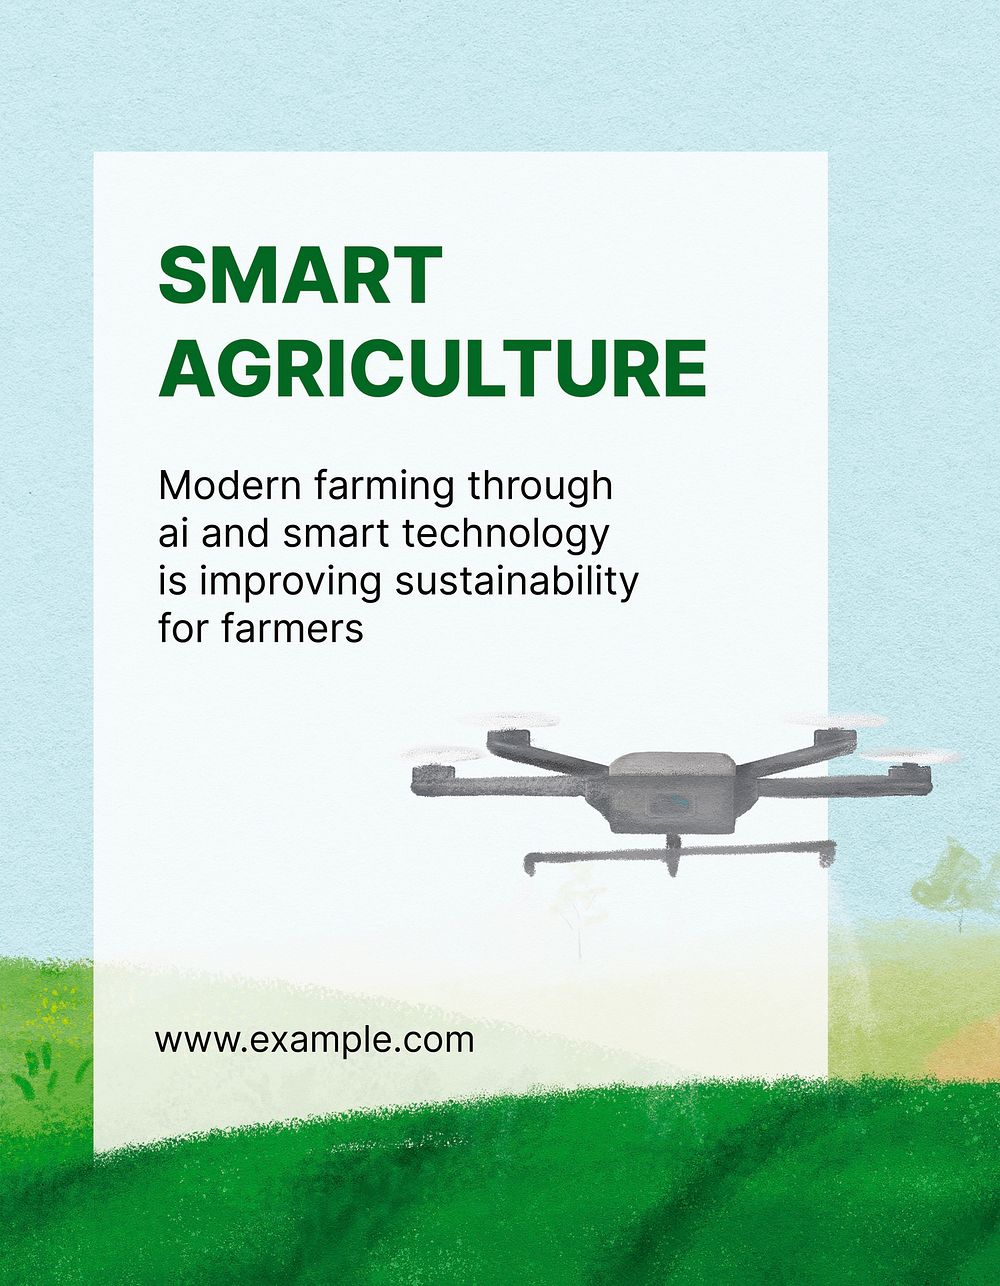 Smart agriculture flyer template, watering drone illustration psd